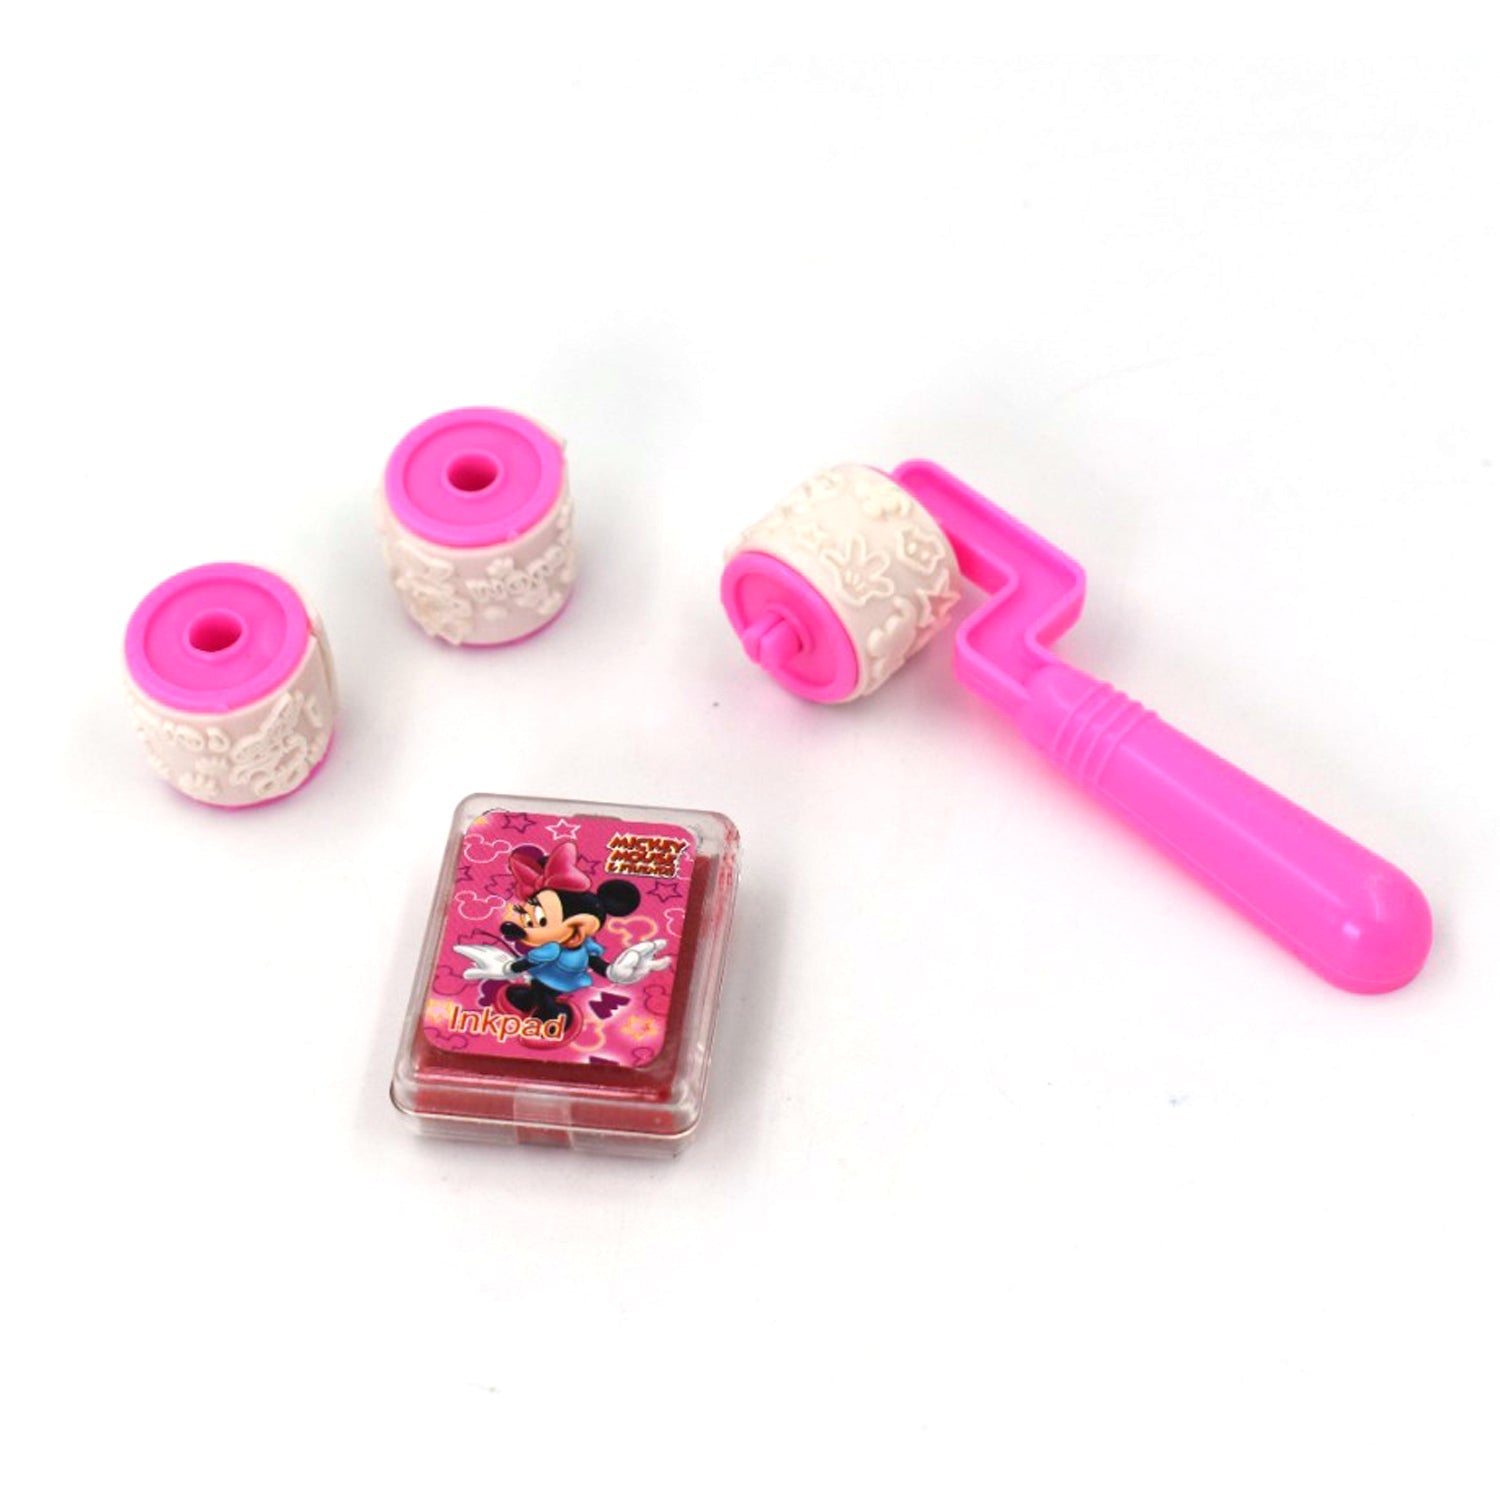 4812 Mickey Cartoon Wheel Roller Stamper Set 4 pieces with inkpad Diary Set Creative for Scrapbooking Card Making Kids Gift Fun (Multicolor) - DeoDap